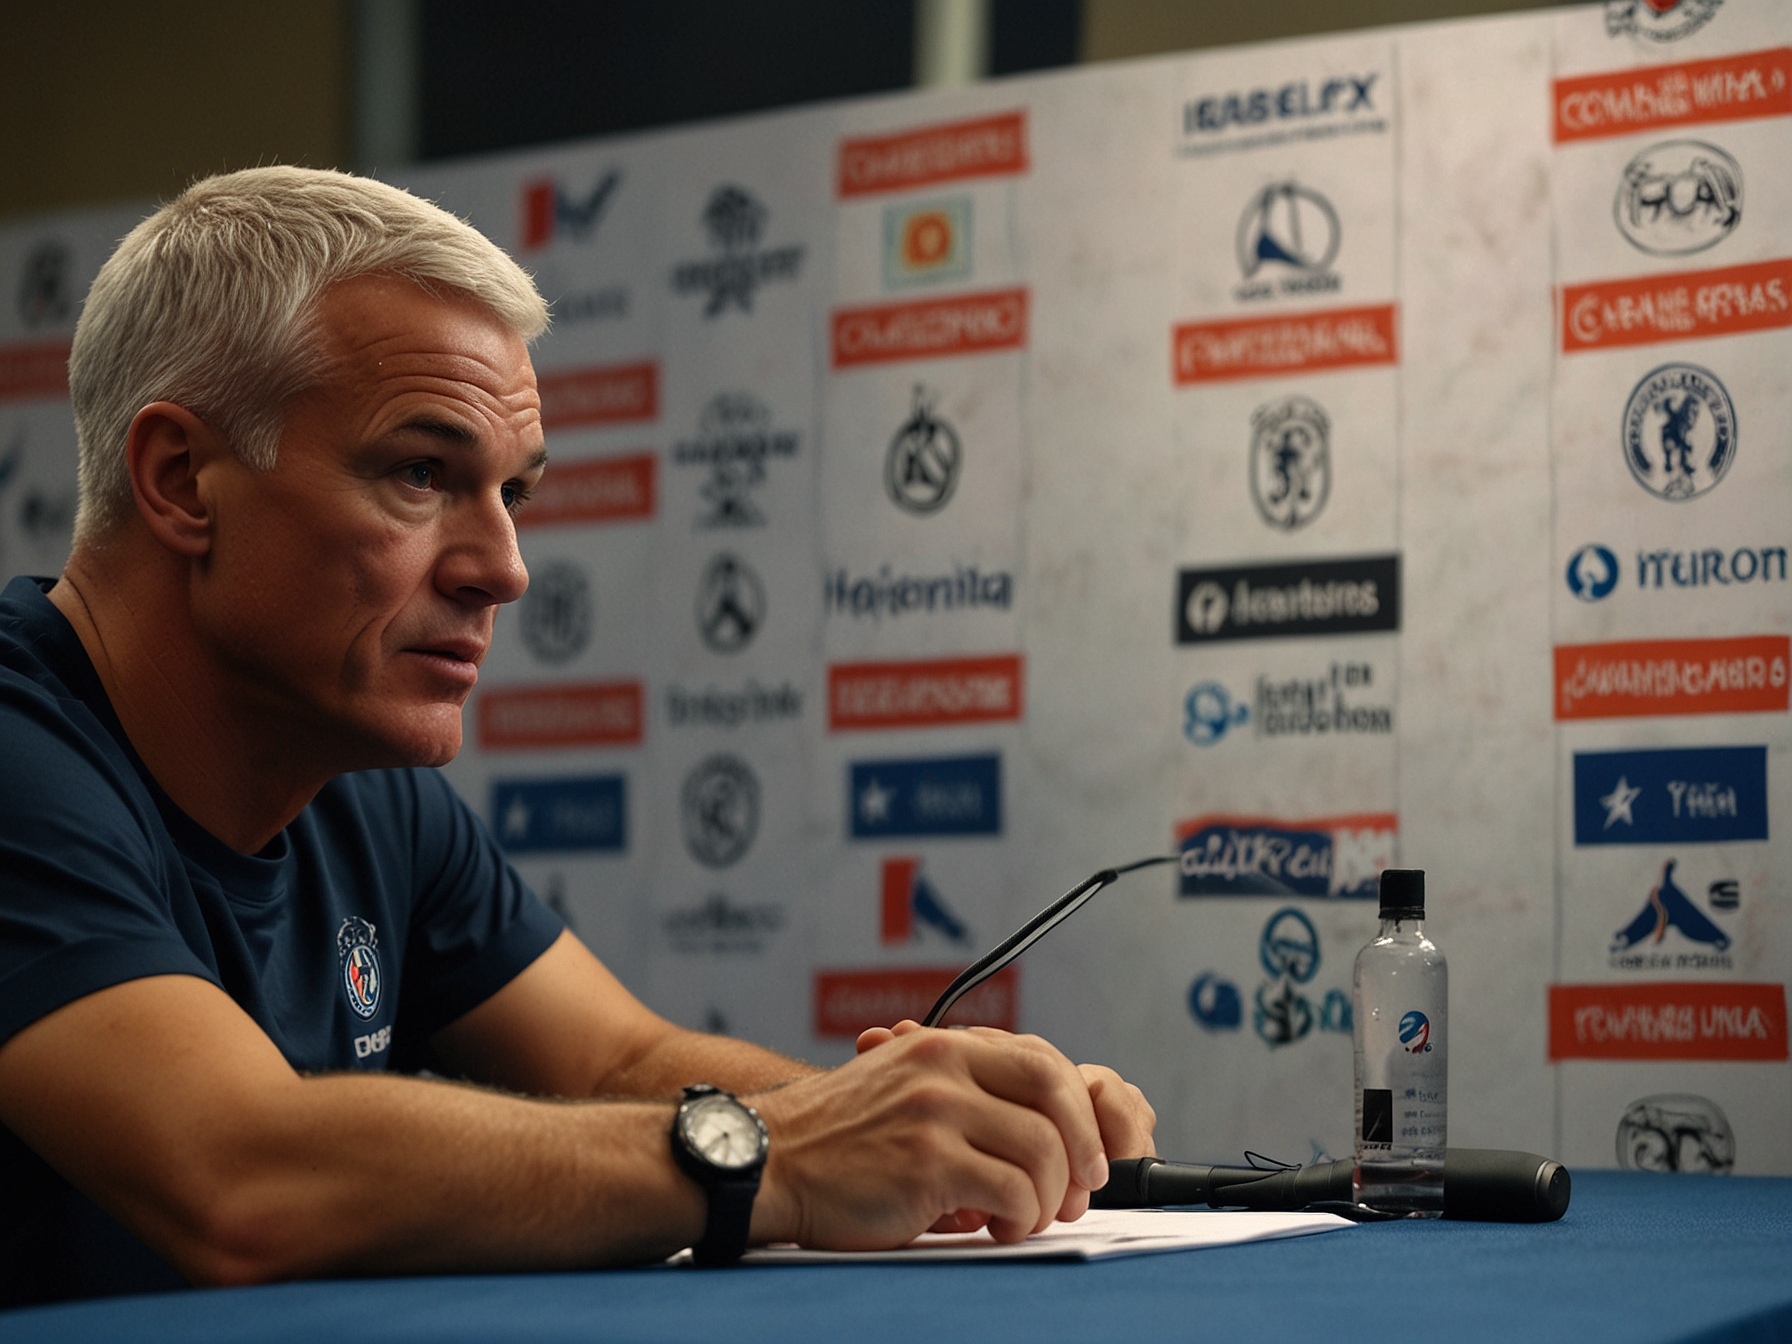 Didier Deschamps speaks at a press conference, addressing concerns about Kylian Mbappe's injury and his potential participation in the upcoming match against the Netherlands.